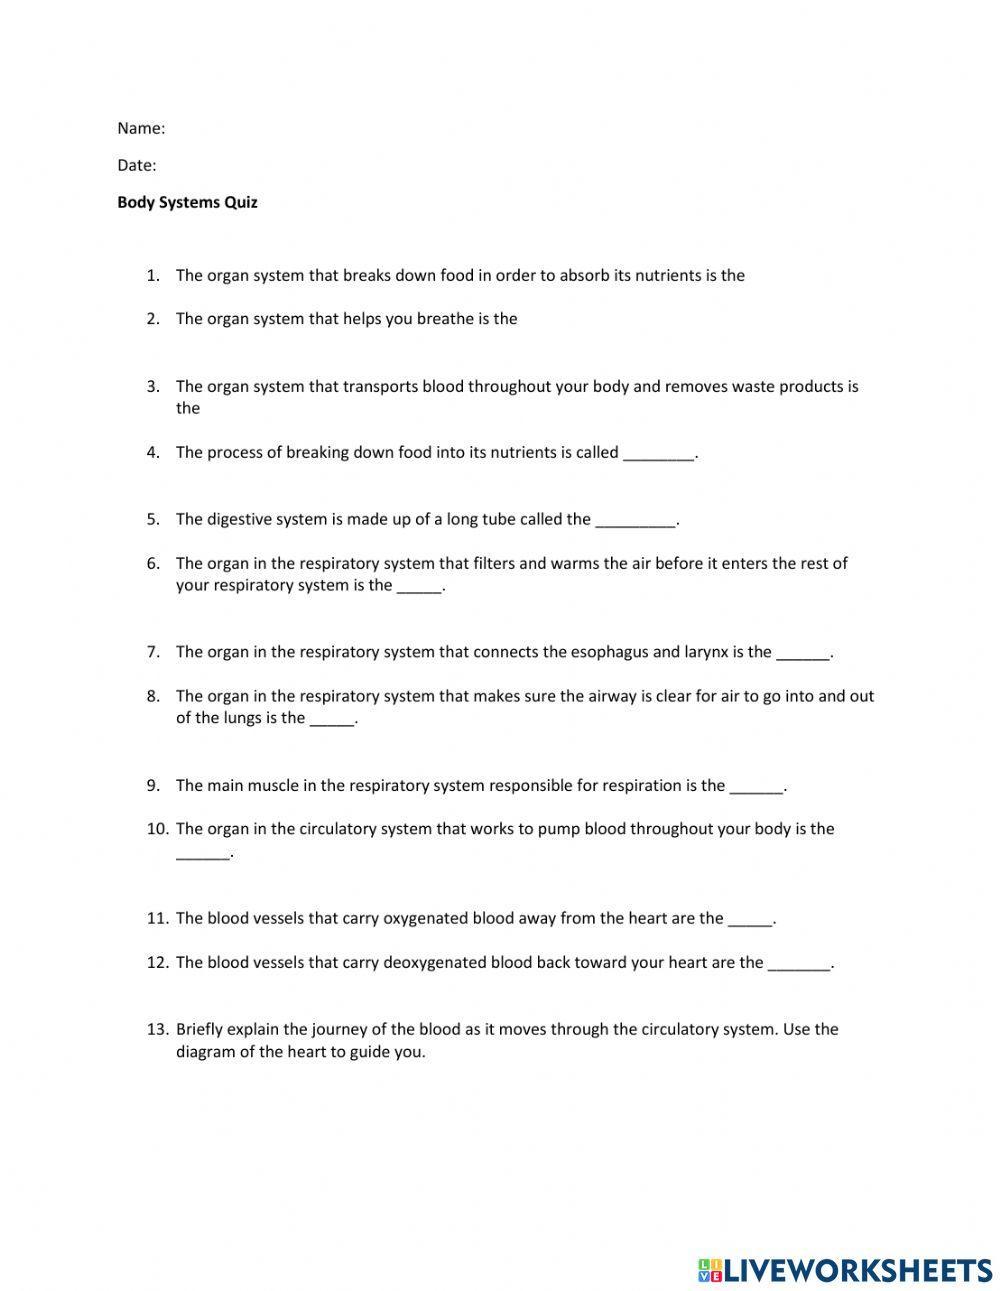 Body Systems Quiz activity | Live Worksheets